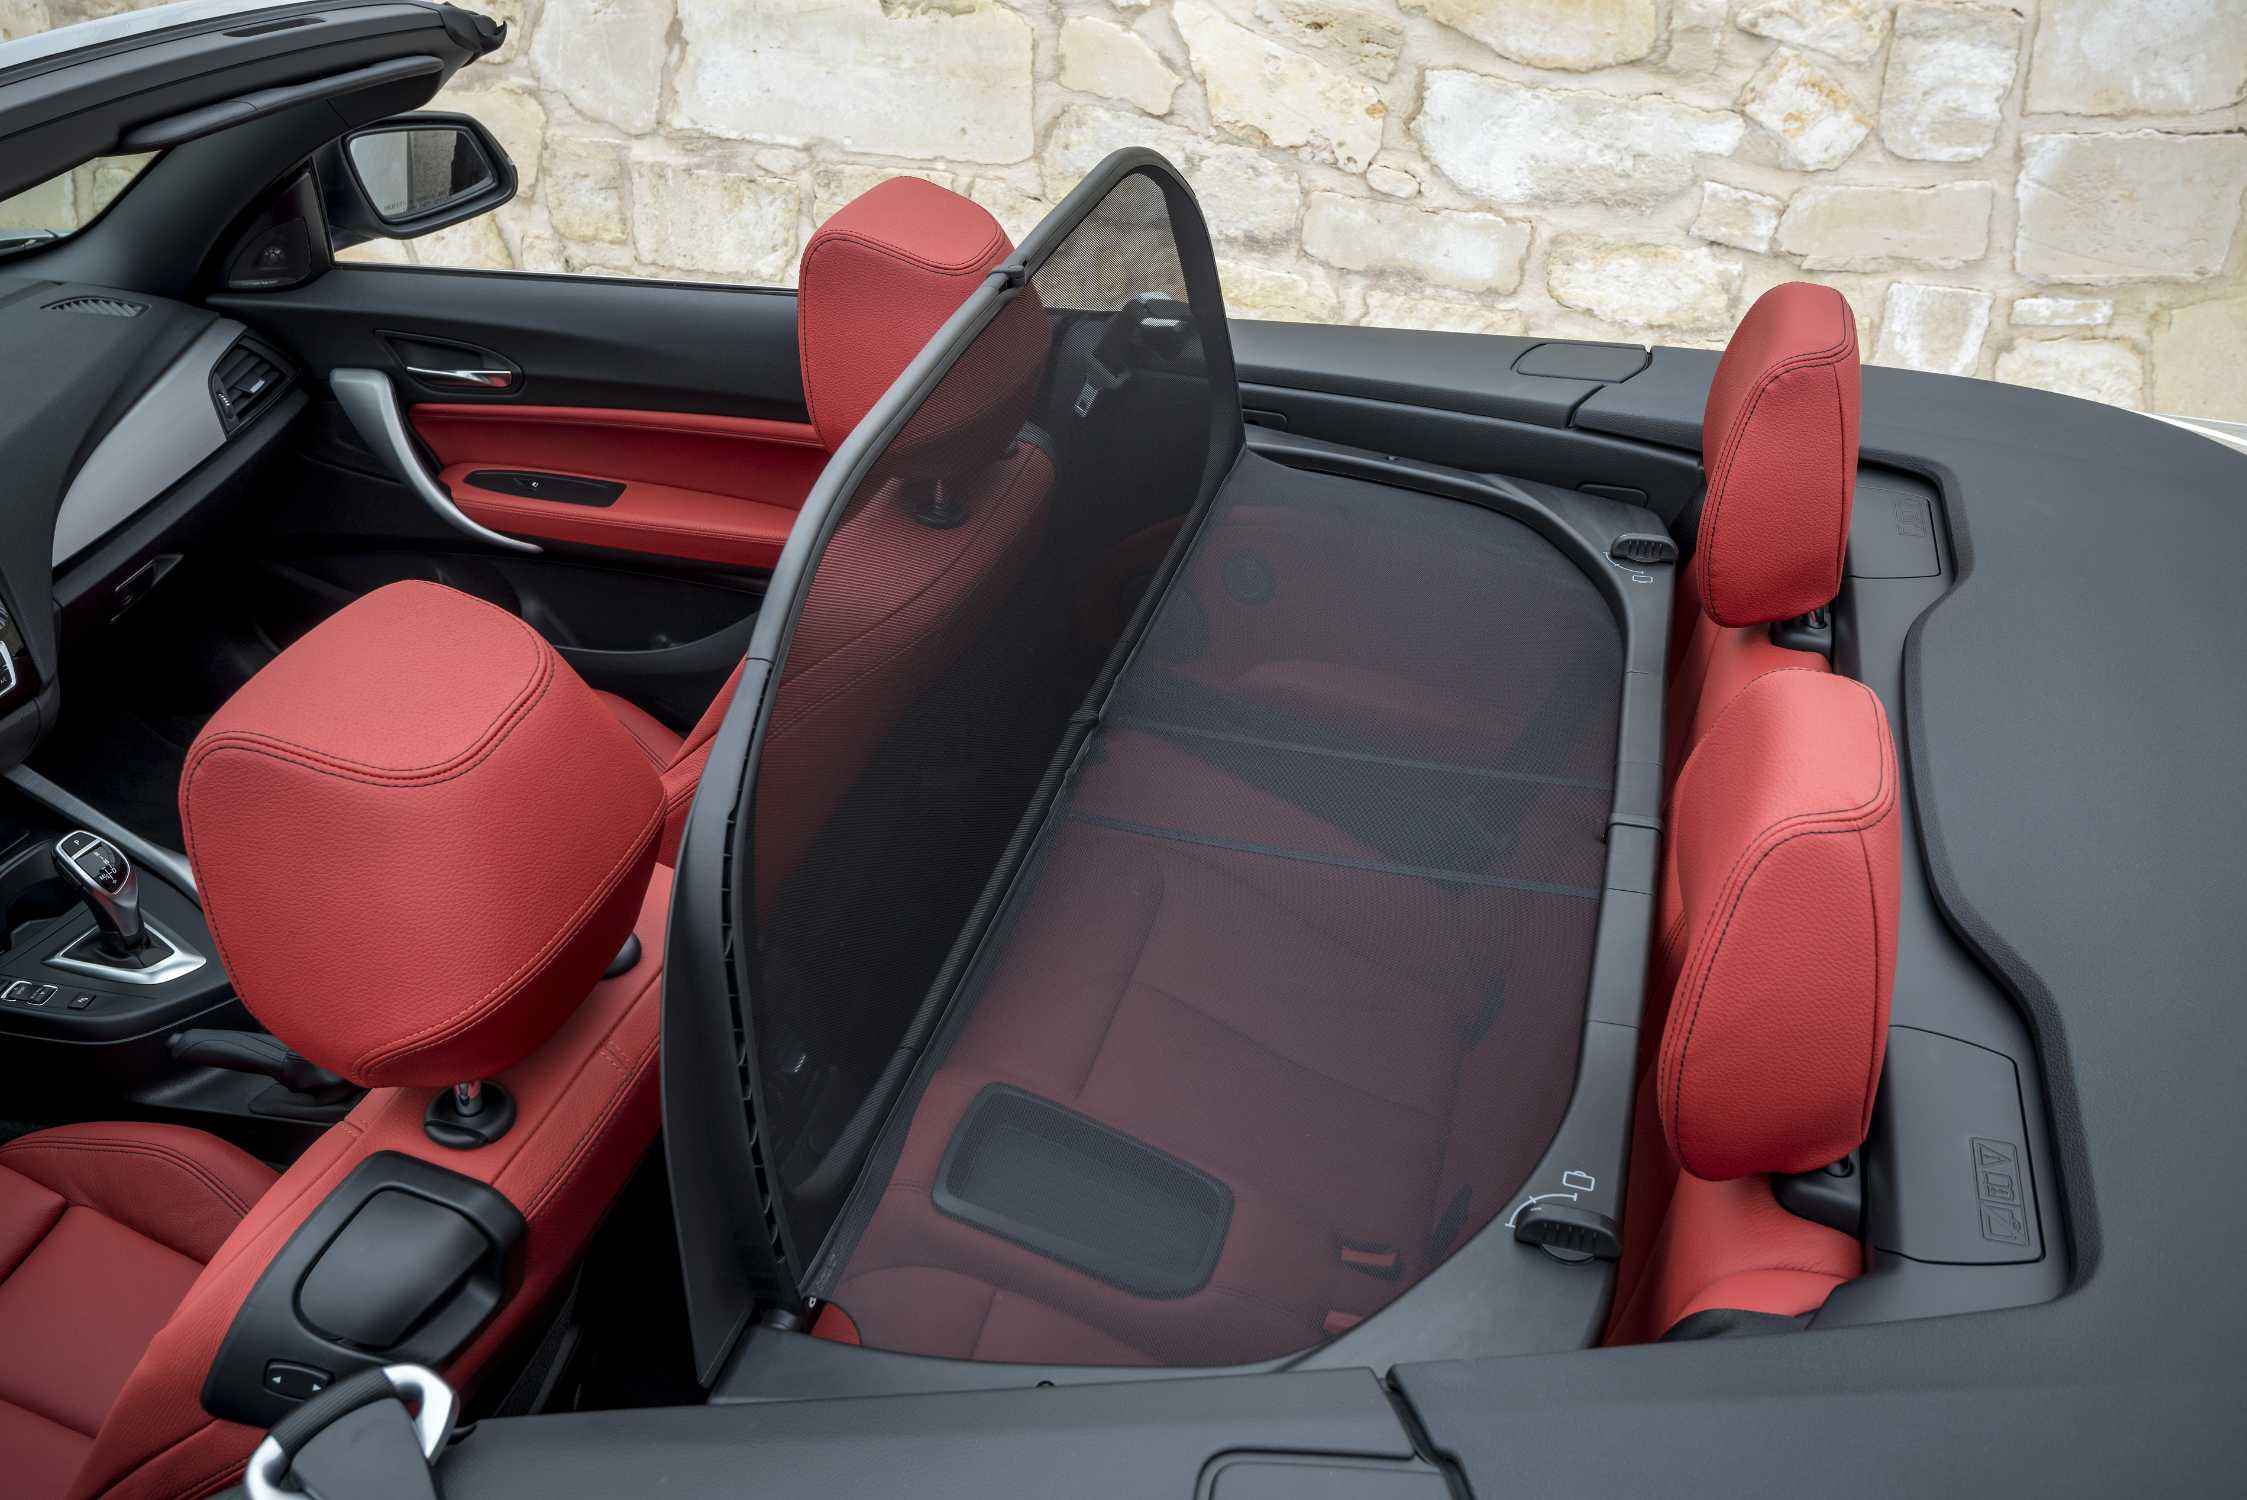 The Bmw 2 Series Convertible On Location Interior 01 2015